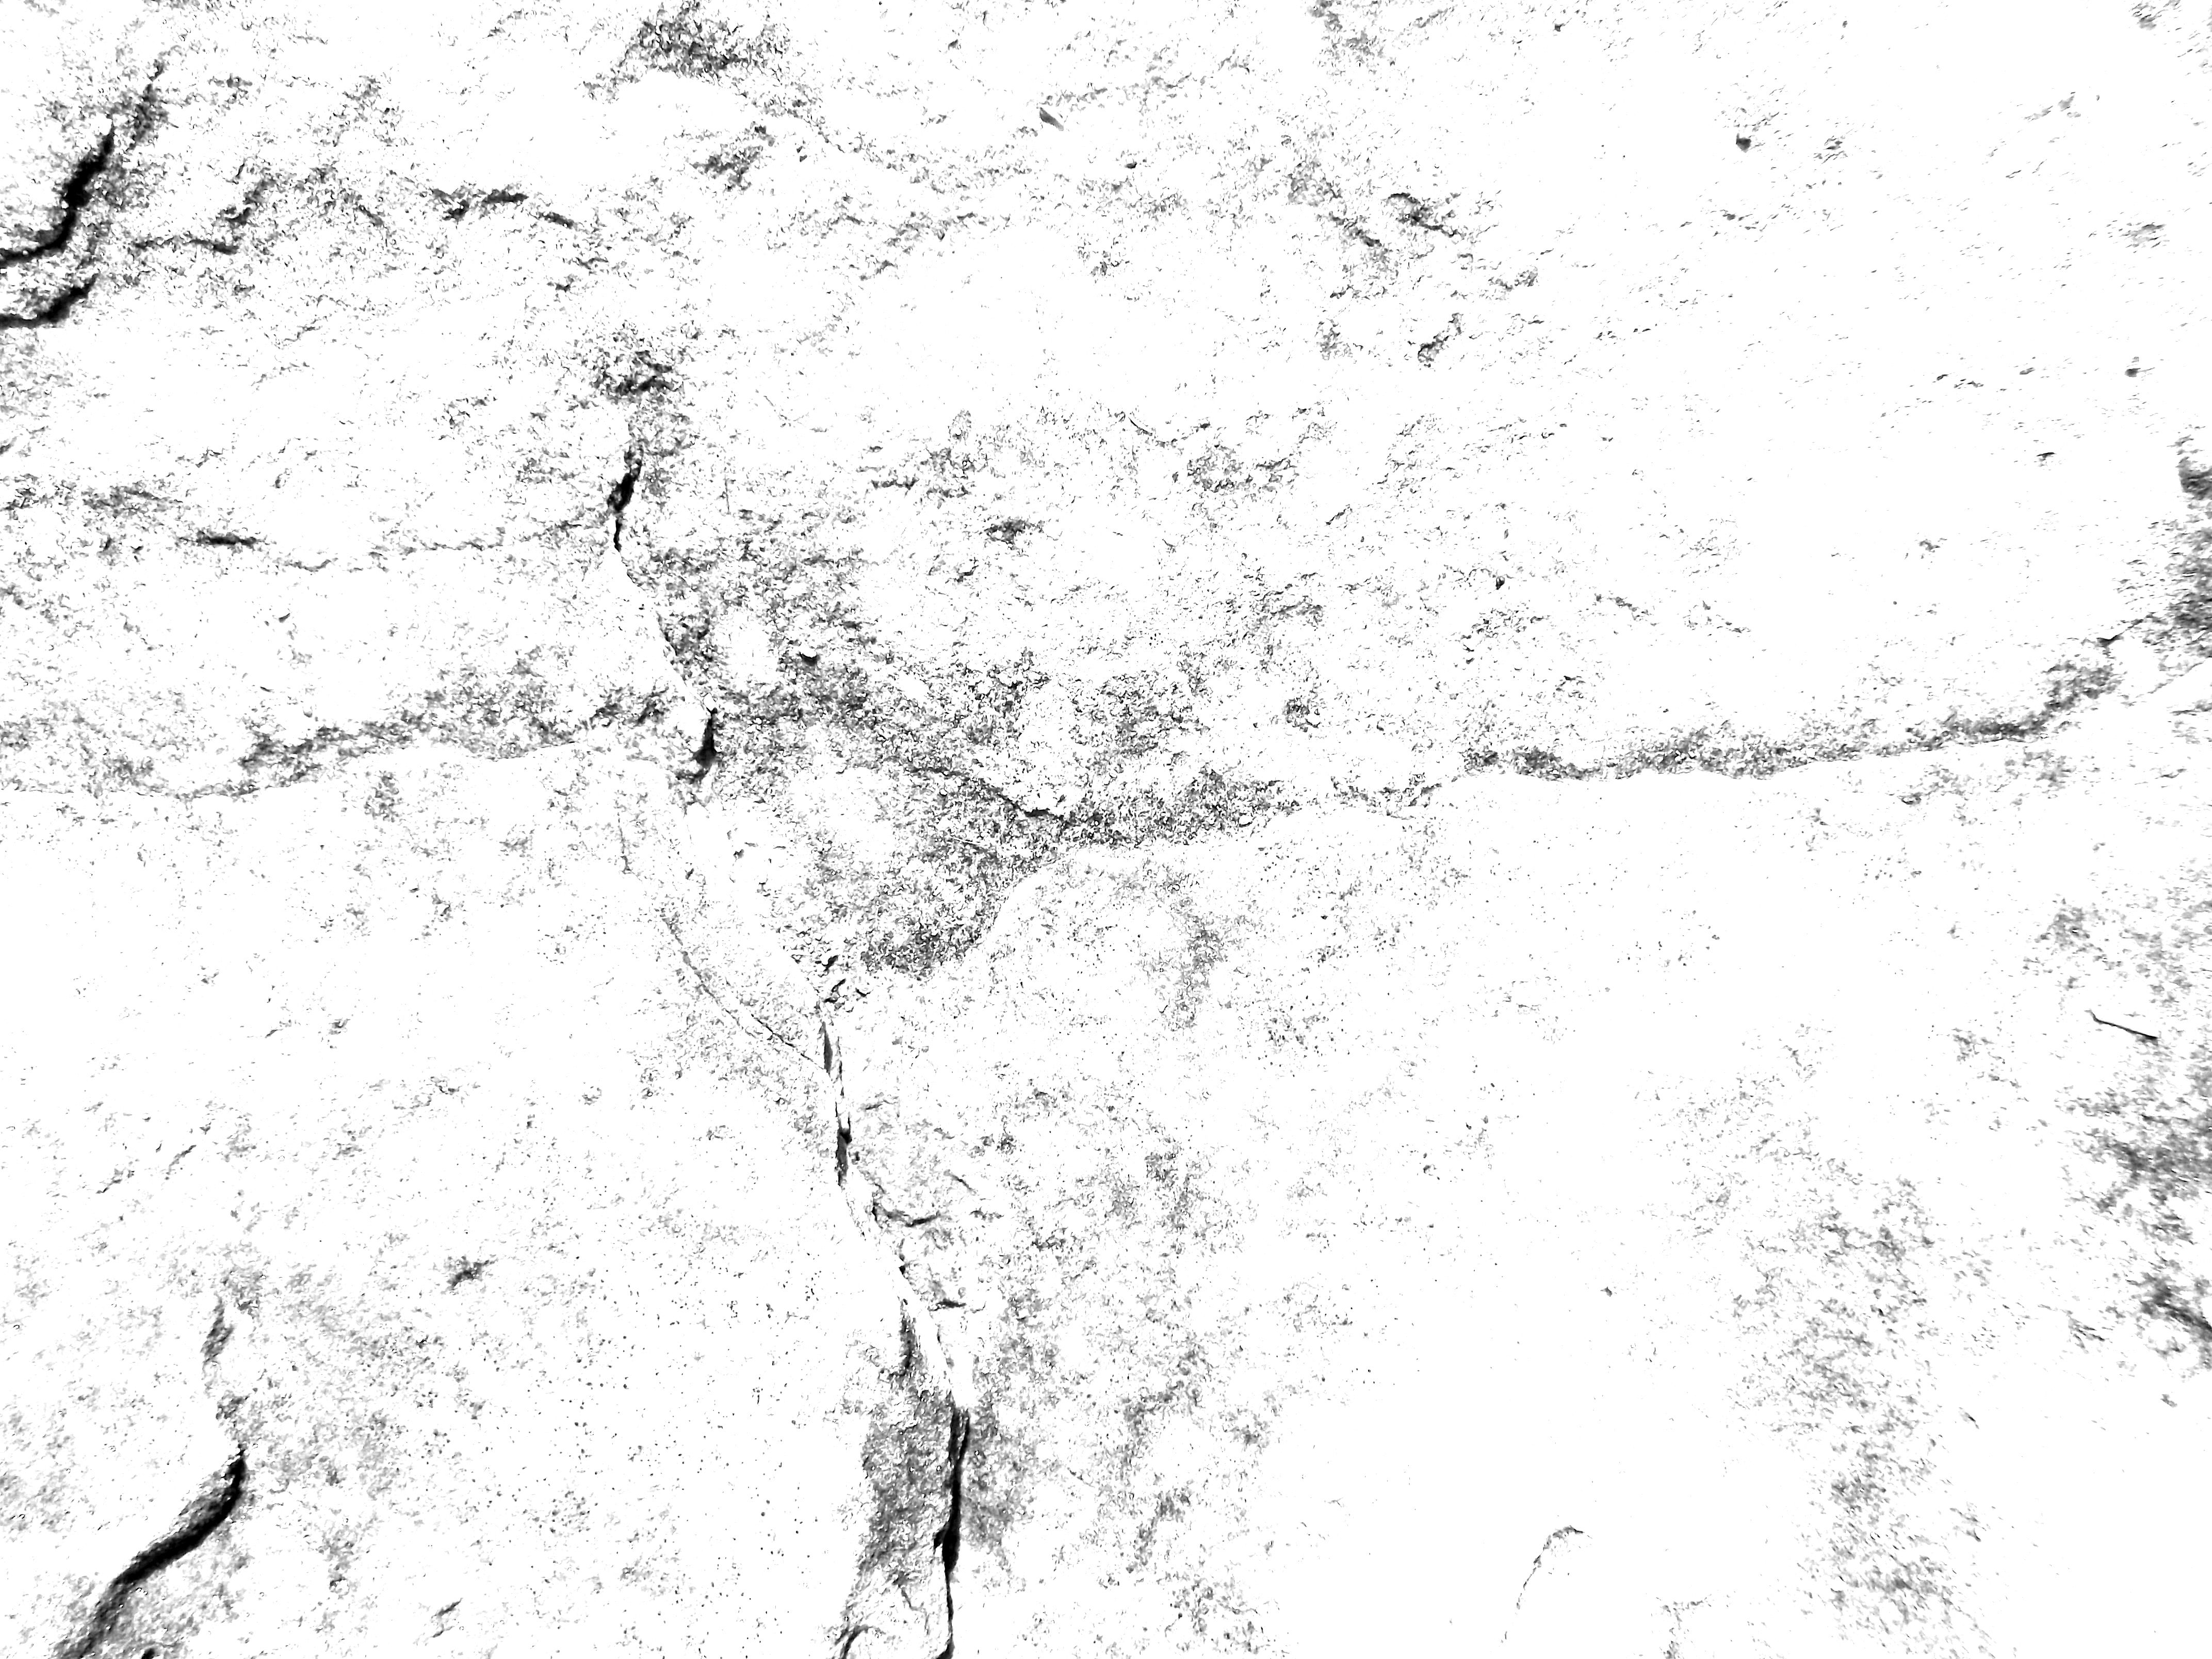 black_and_white_subtle_rock_textures_by_sdwhaven-d6017x2.jpg (4288 ...